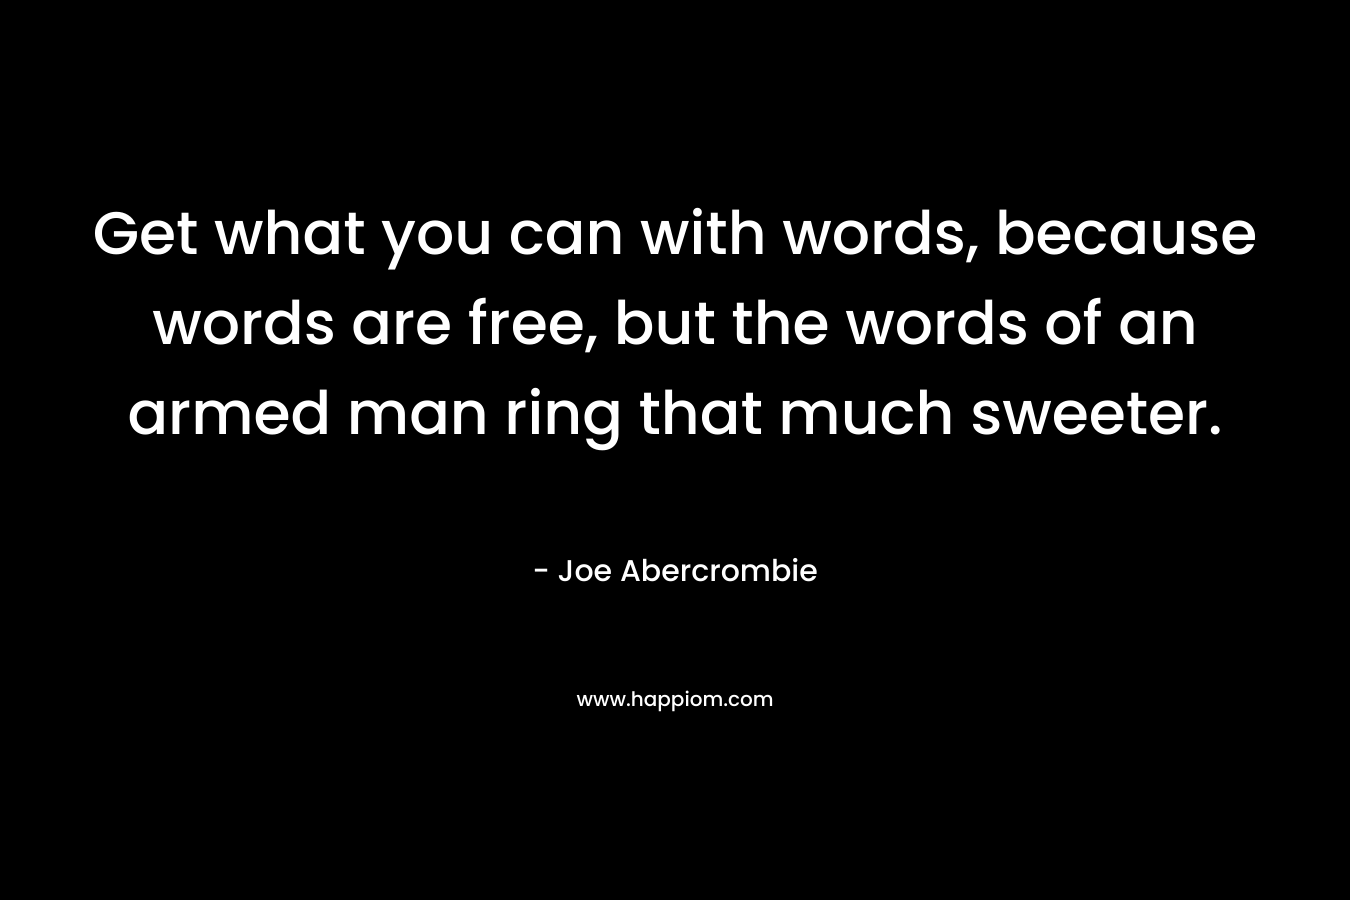 Get what you can with words, because words are free, but the words of an armed man ring that much sweeter.